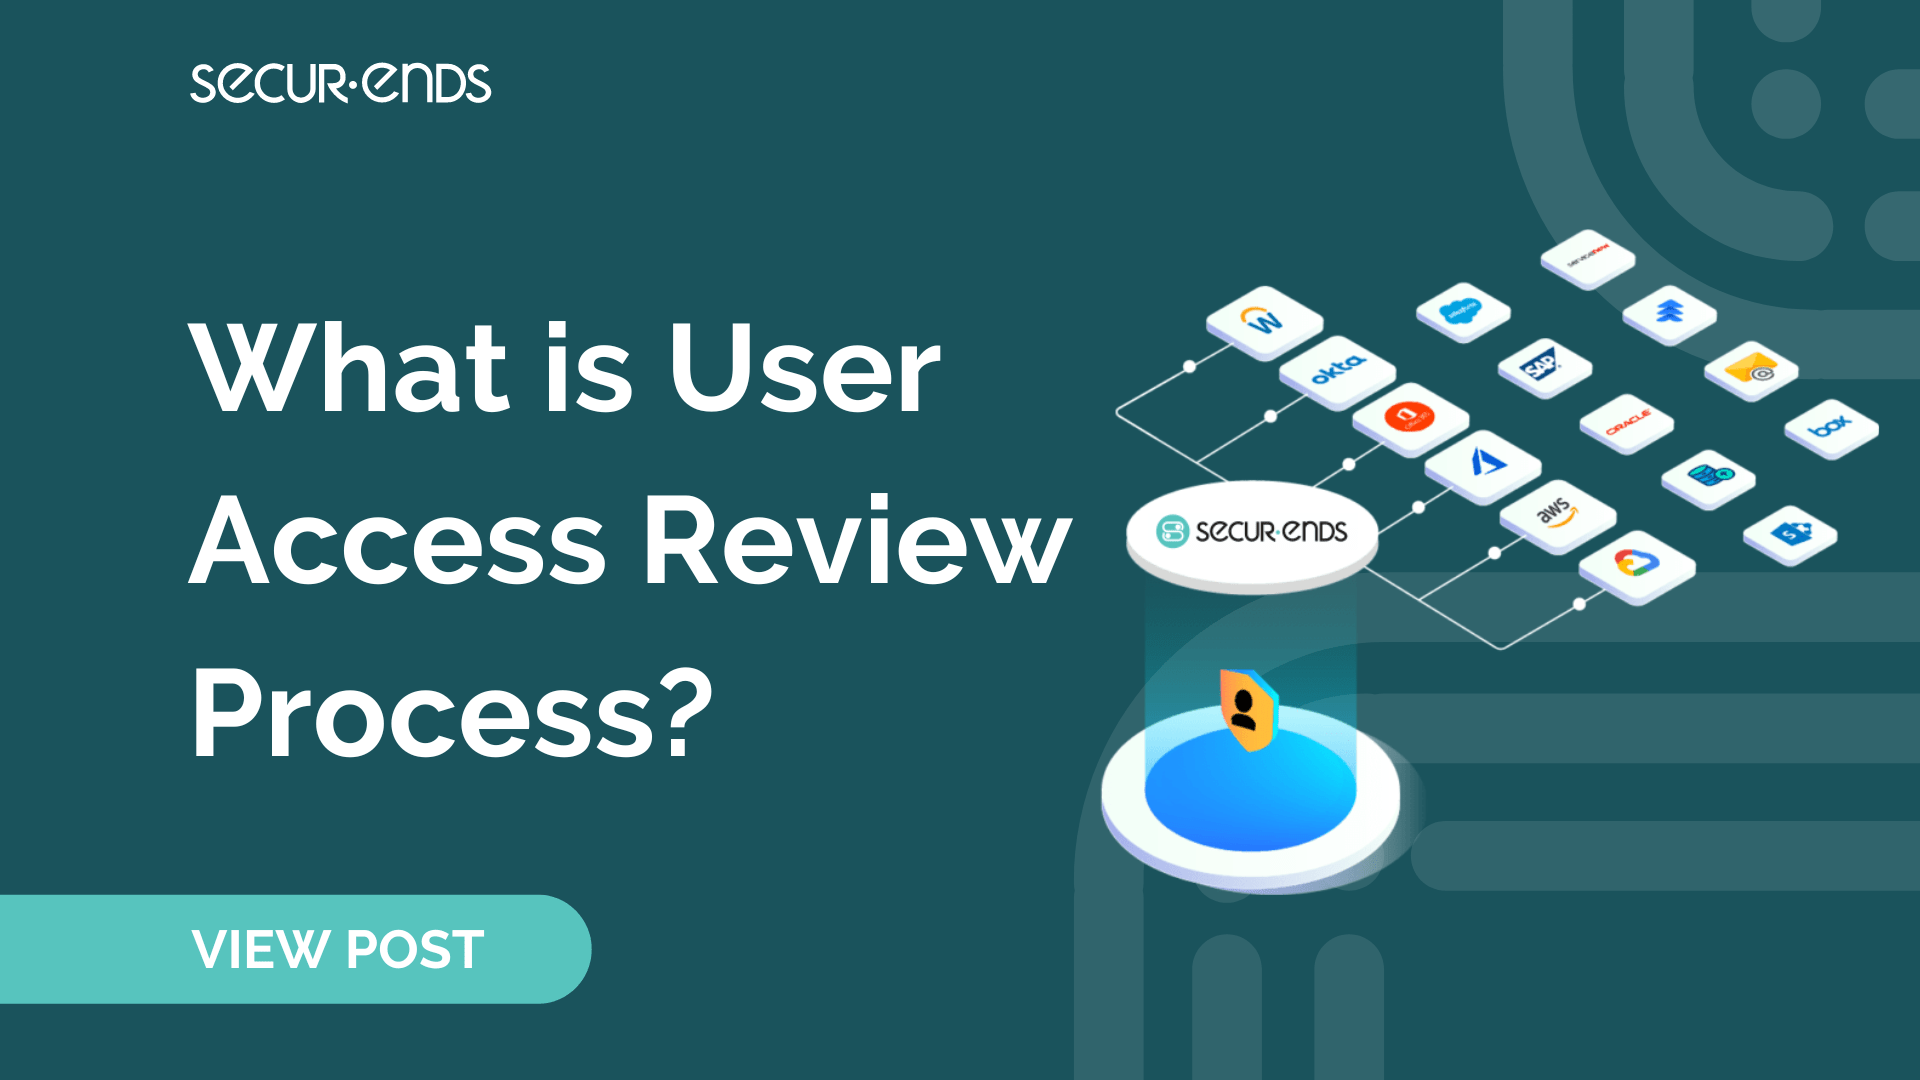 What is User Access Review Process? SecurEnds